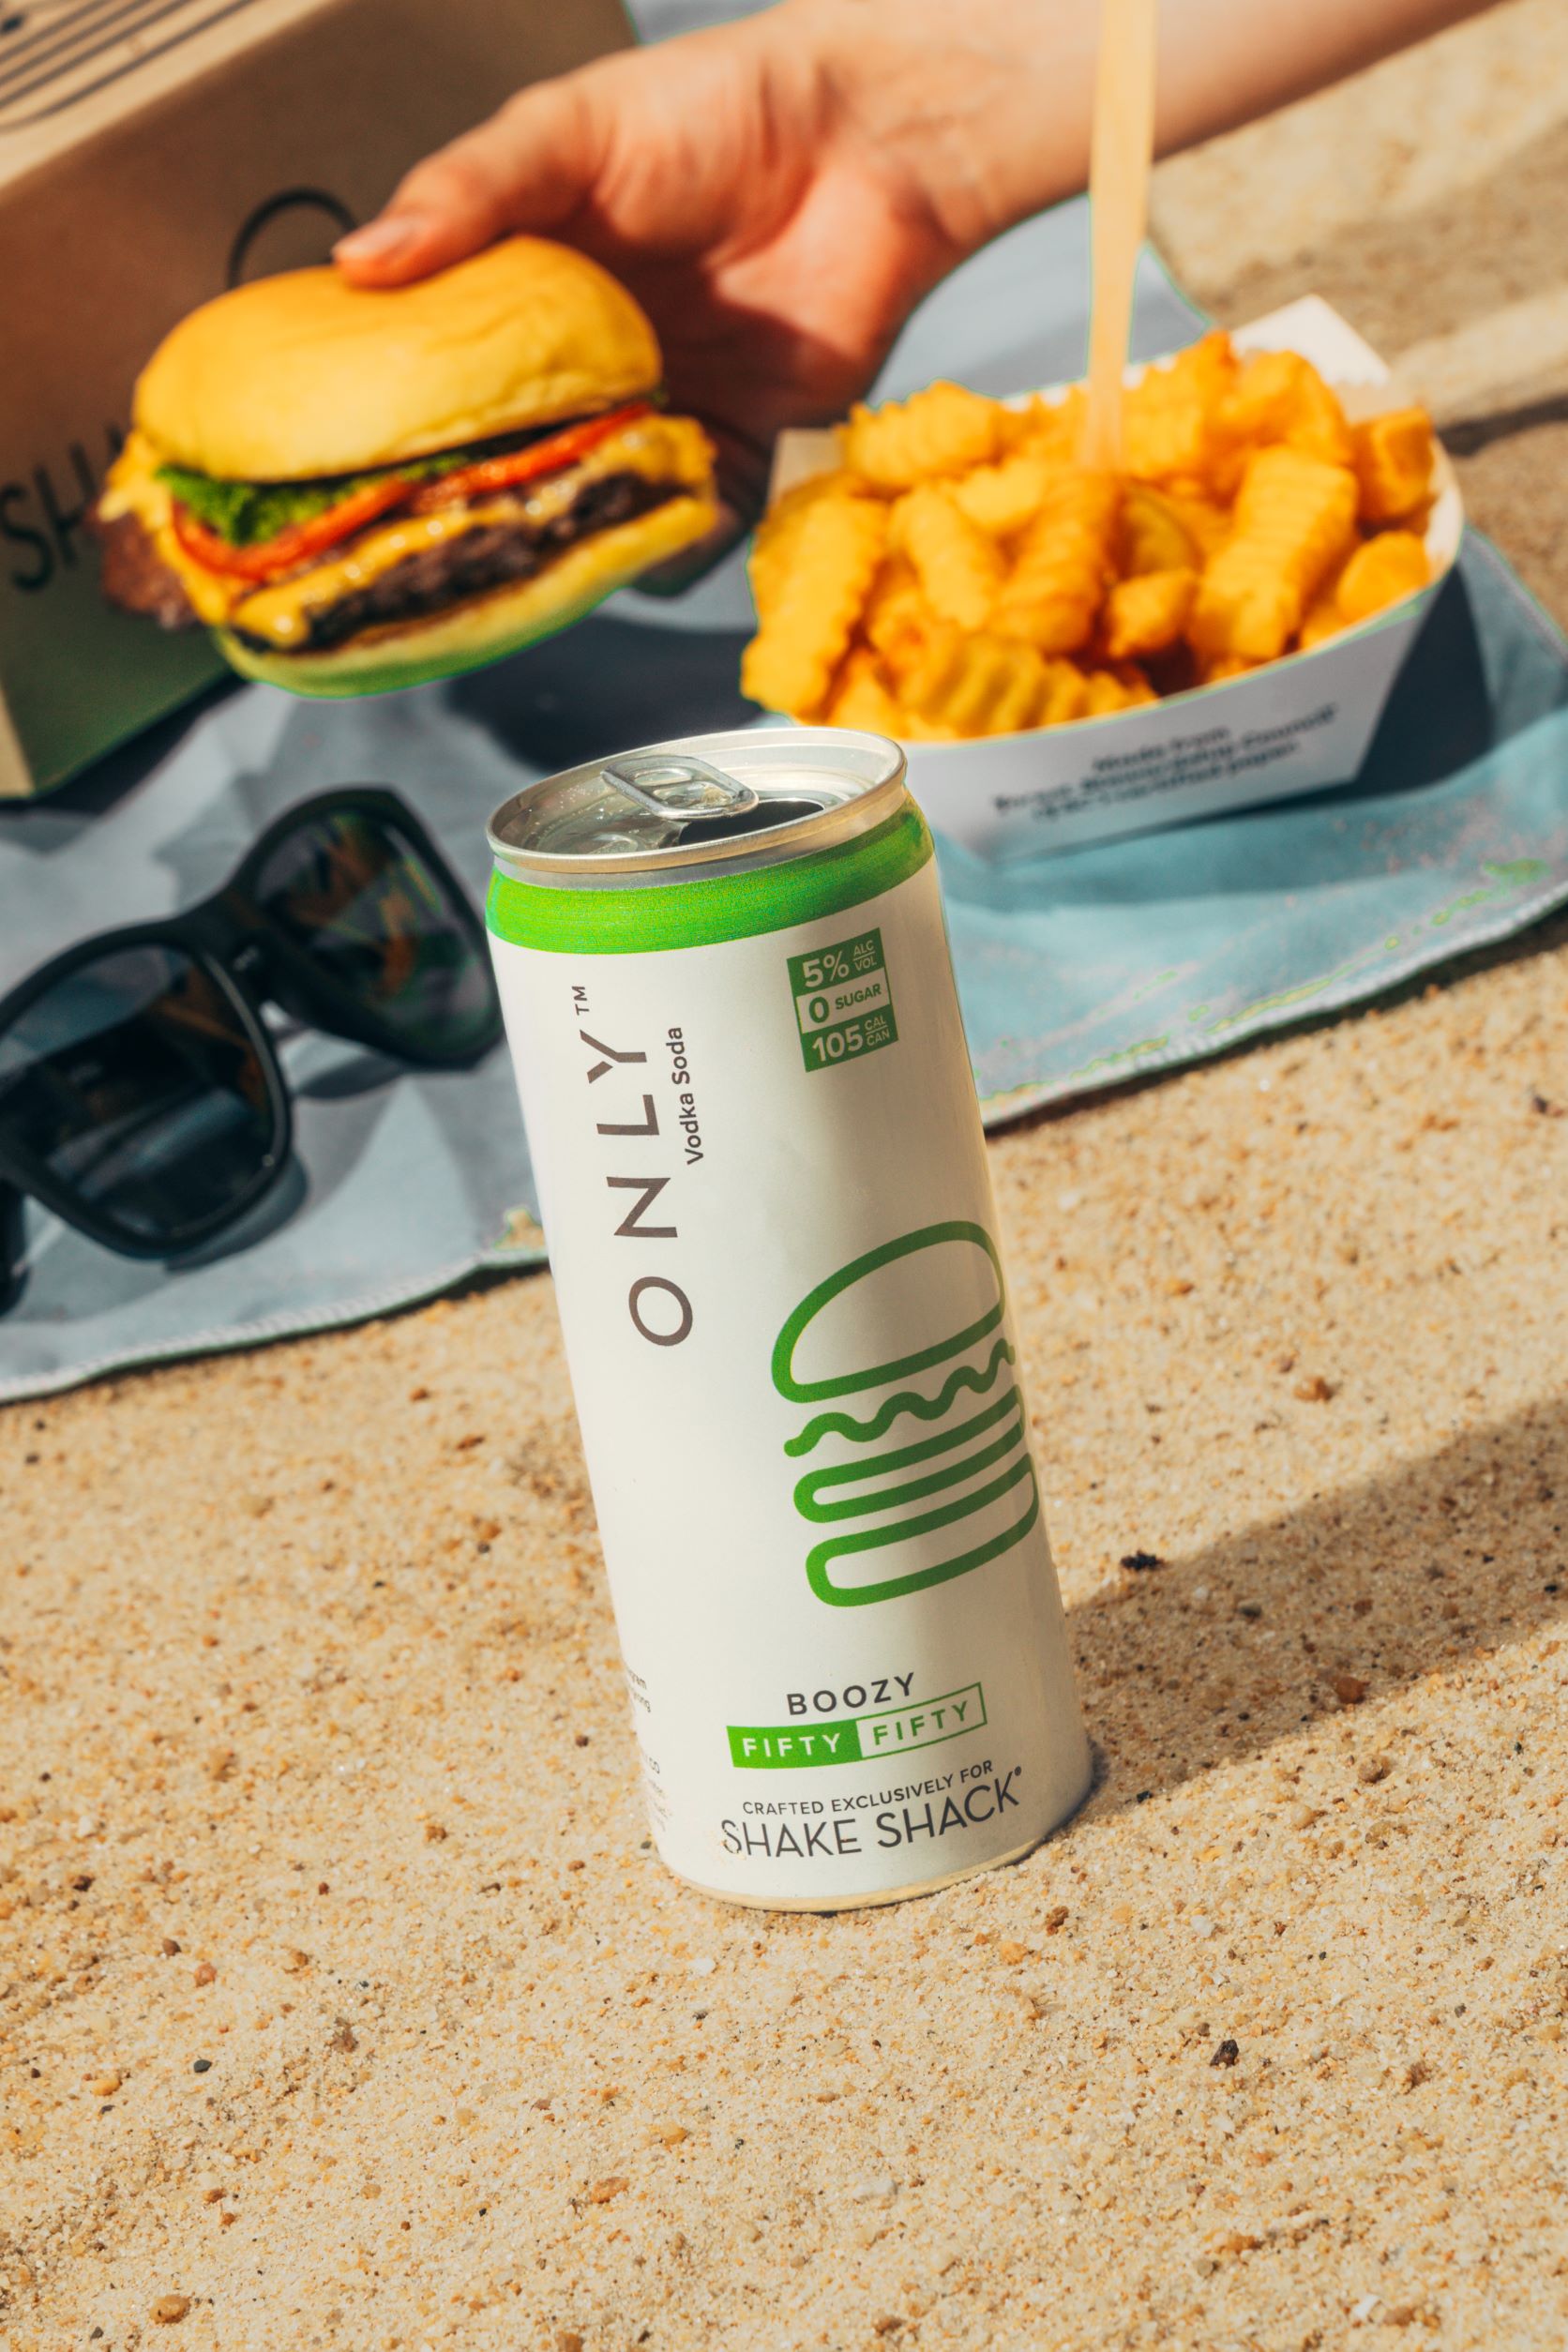 Shake Shack Hong Kong and ONLY Beverages collaborate on Limited-Time Boozy Fifty/Fifty